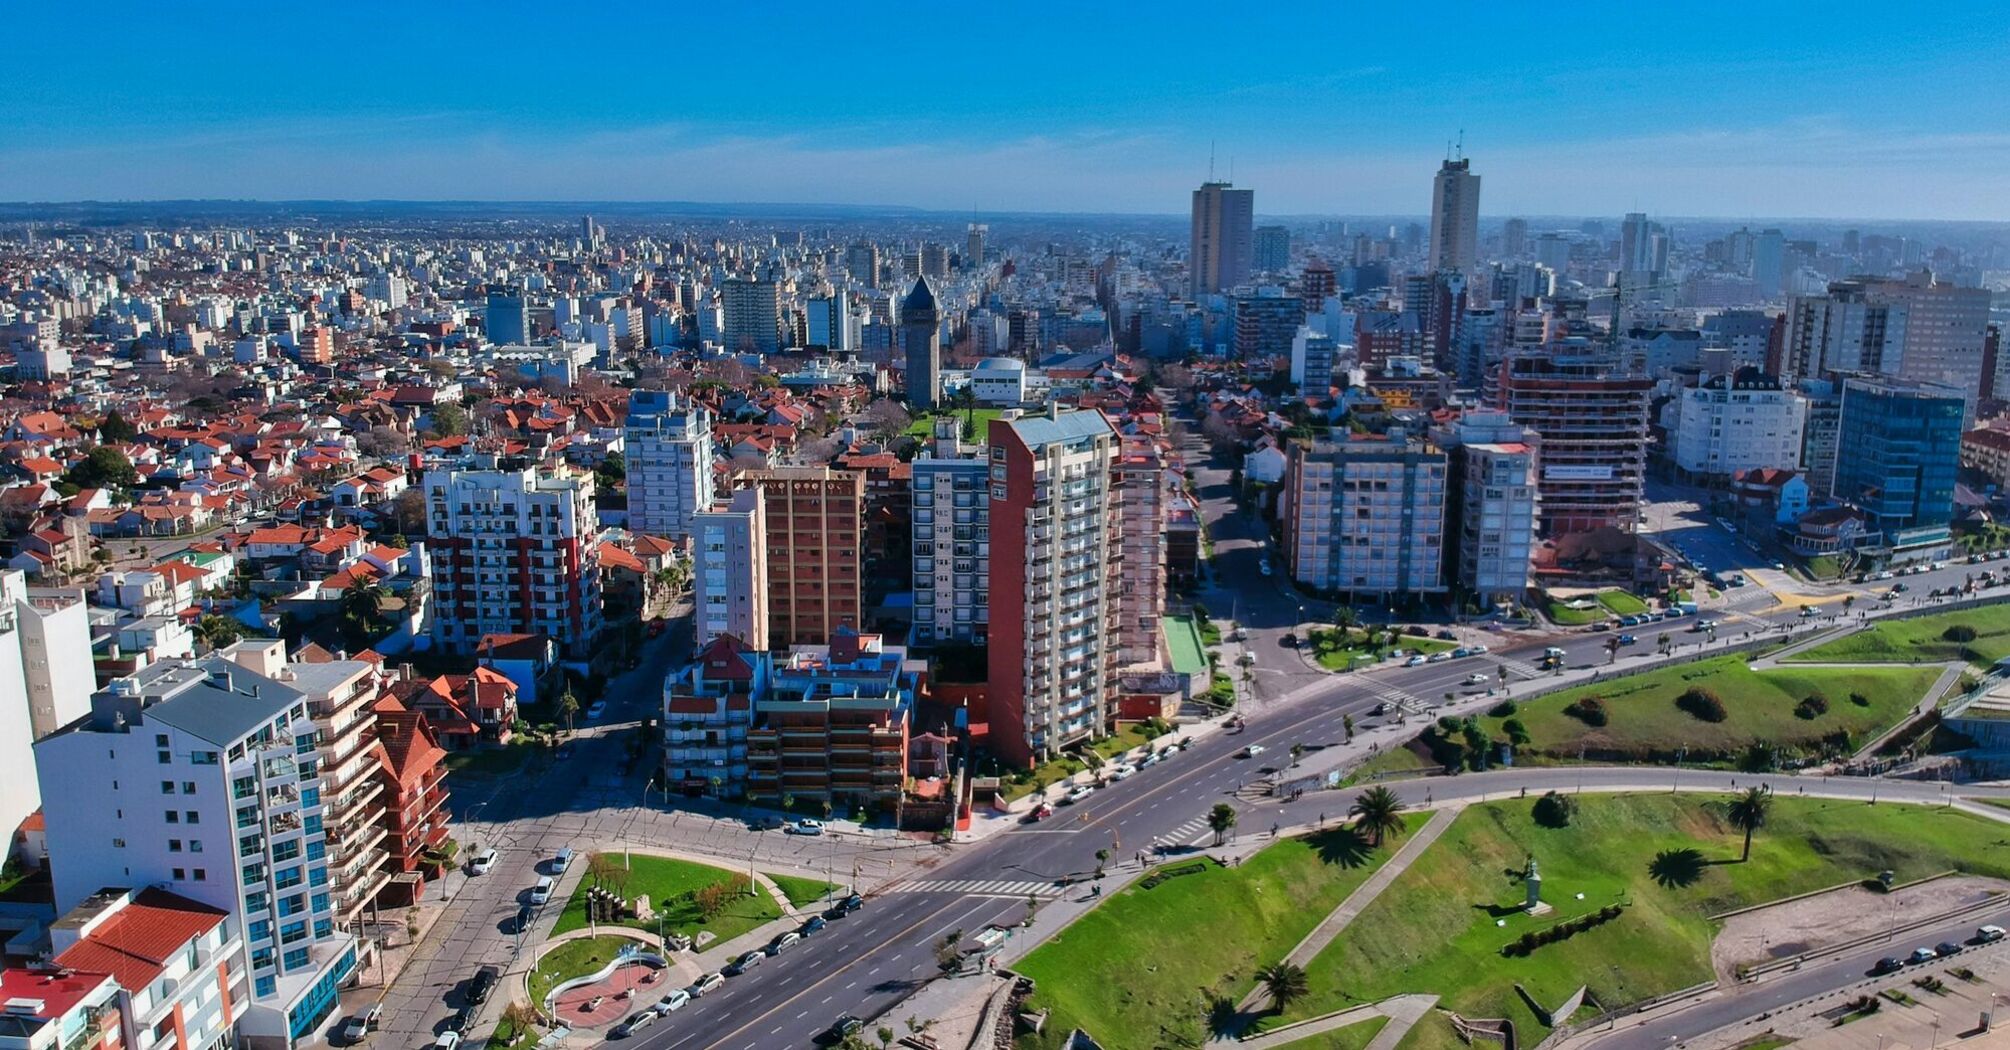 An aerial view of Mar del Plata, showcasing its bustling cityscape with numerous buildings, wide streets